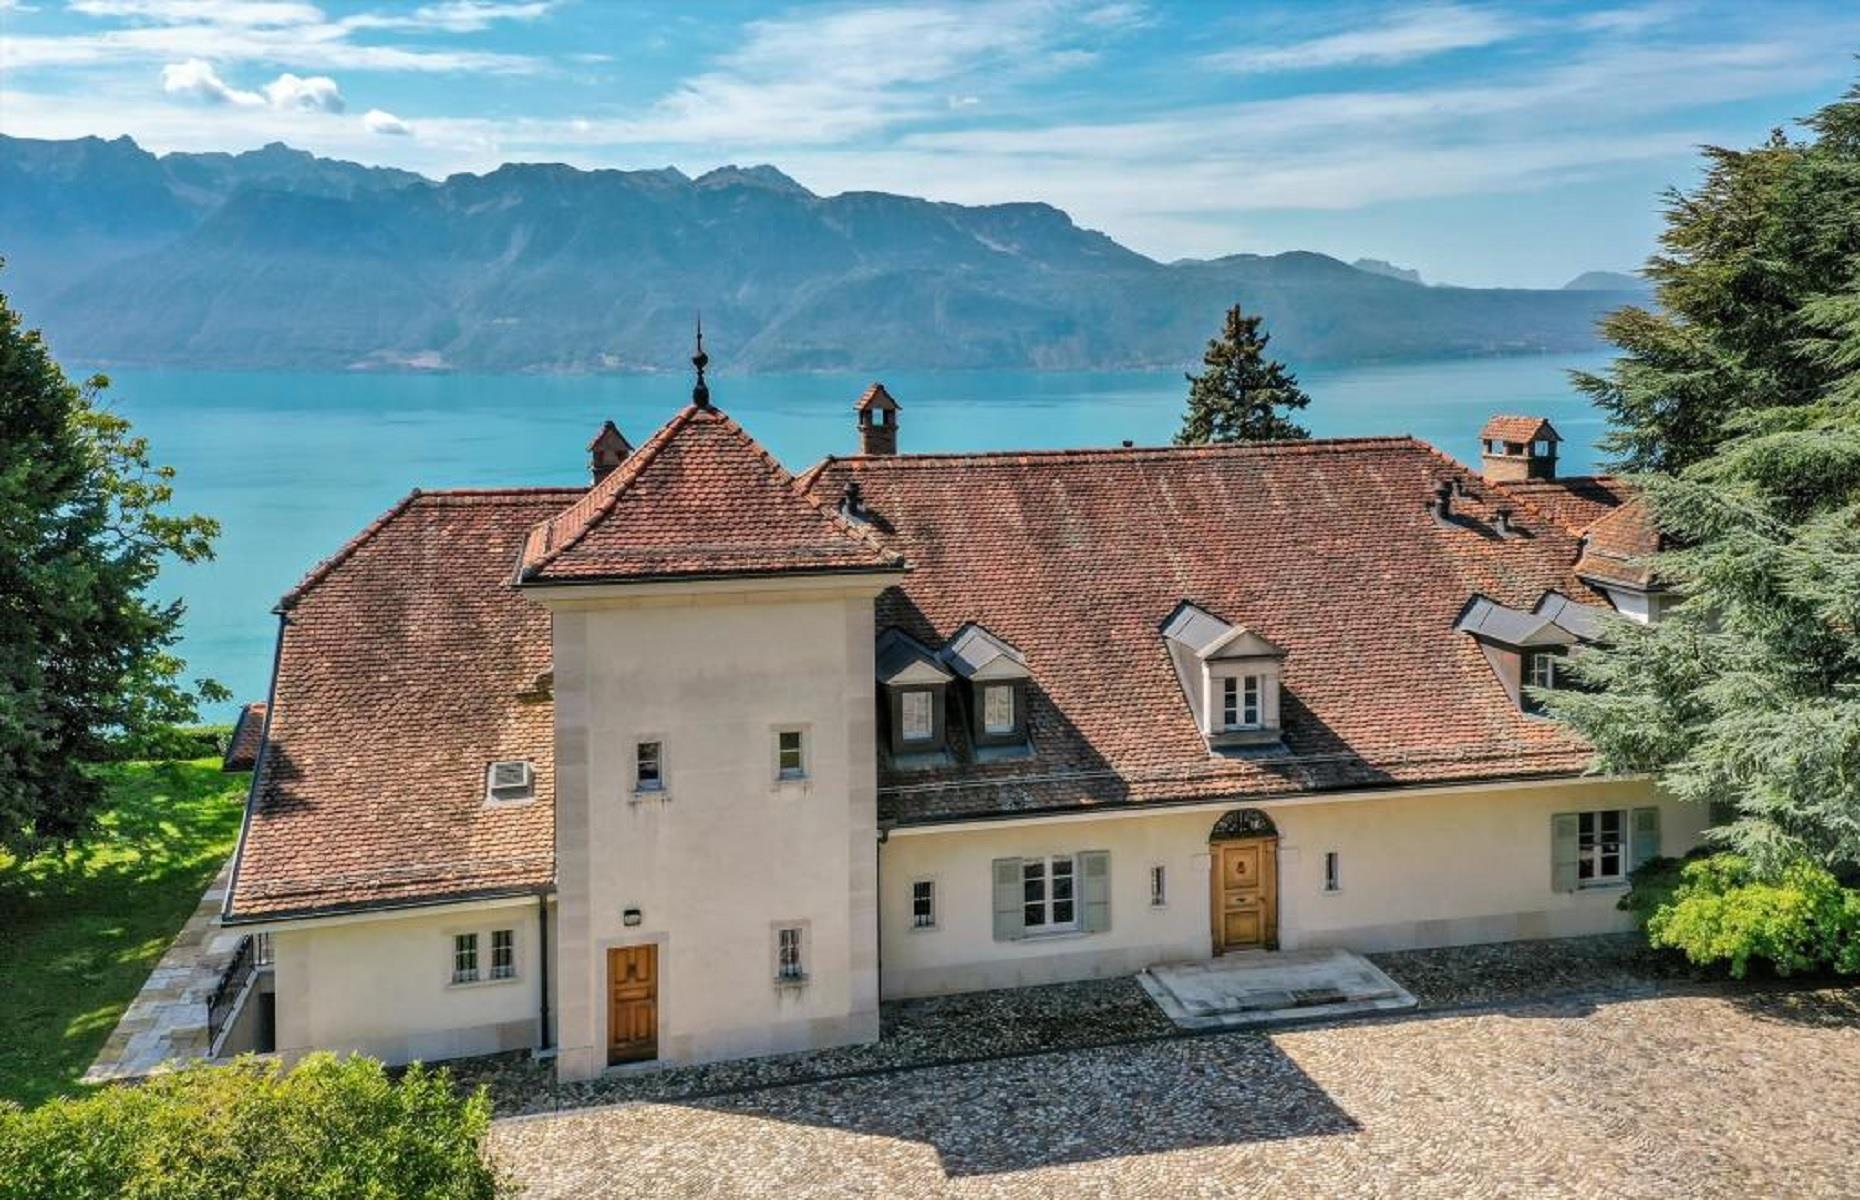 <p>With all the charm, space and style of a historic castle, this gorgeous property was built in 1996, yet it looks like it's been on this idyllic lake-side plot in Switzerland for centuries.</p>  <p>Described by Knight Frank as a "stupendous 14-room mansion", the residence is situated in Chexbres, a Swiss village known for its vineyards, and enjoys 180-degree views of Lake Geneva. </p>